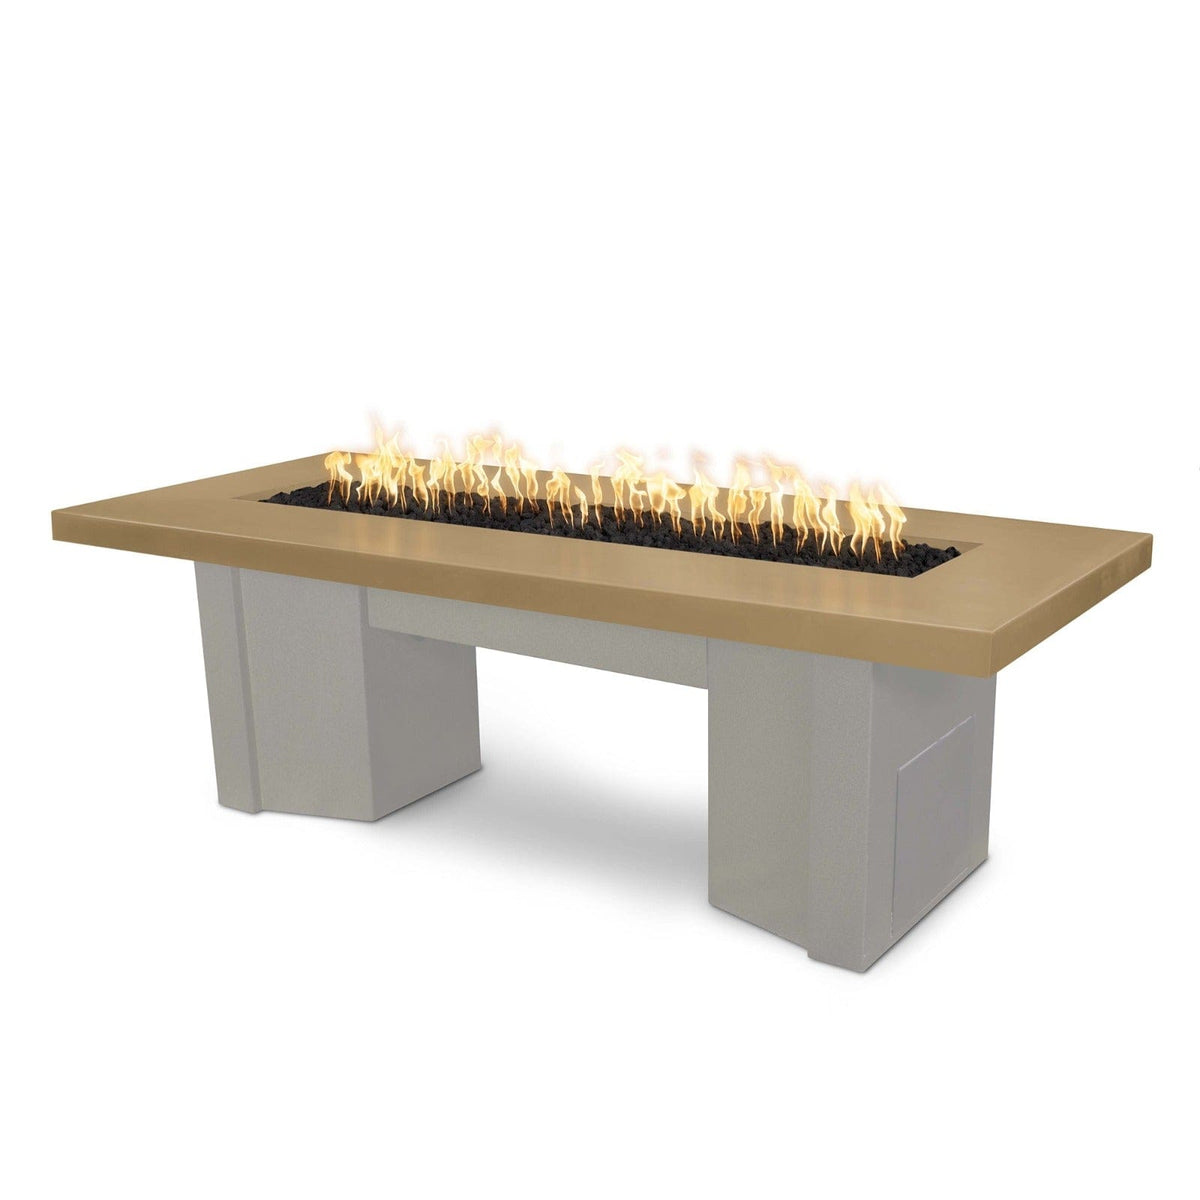 The Outdoor Plus Fire Features Brown (-BRN) / Pewter Powder Coated Steel (-PEW) The Outdoor Plus 78&quot; Alameda Fire Table Smooth Concrete in Liquid Propane - Flame Sense System with Push Button Spark Igniter / OPT-ALMGFRC78FSEN-LP